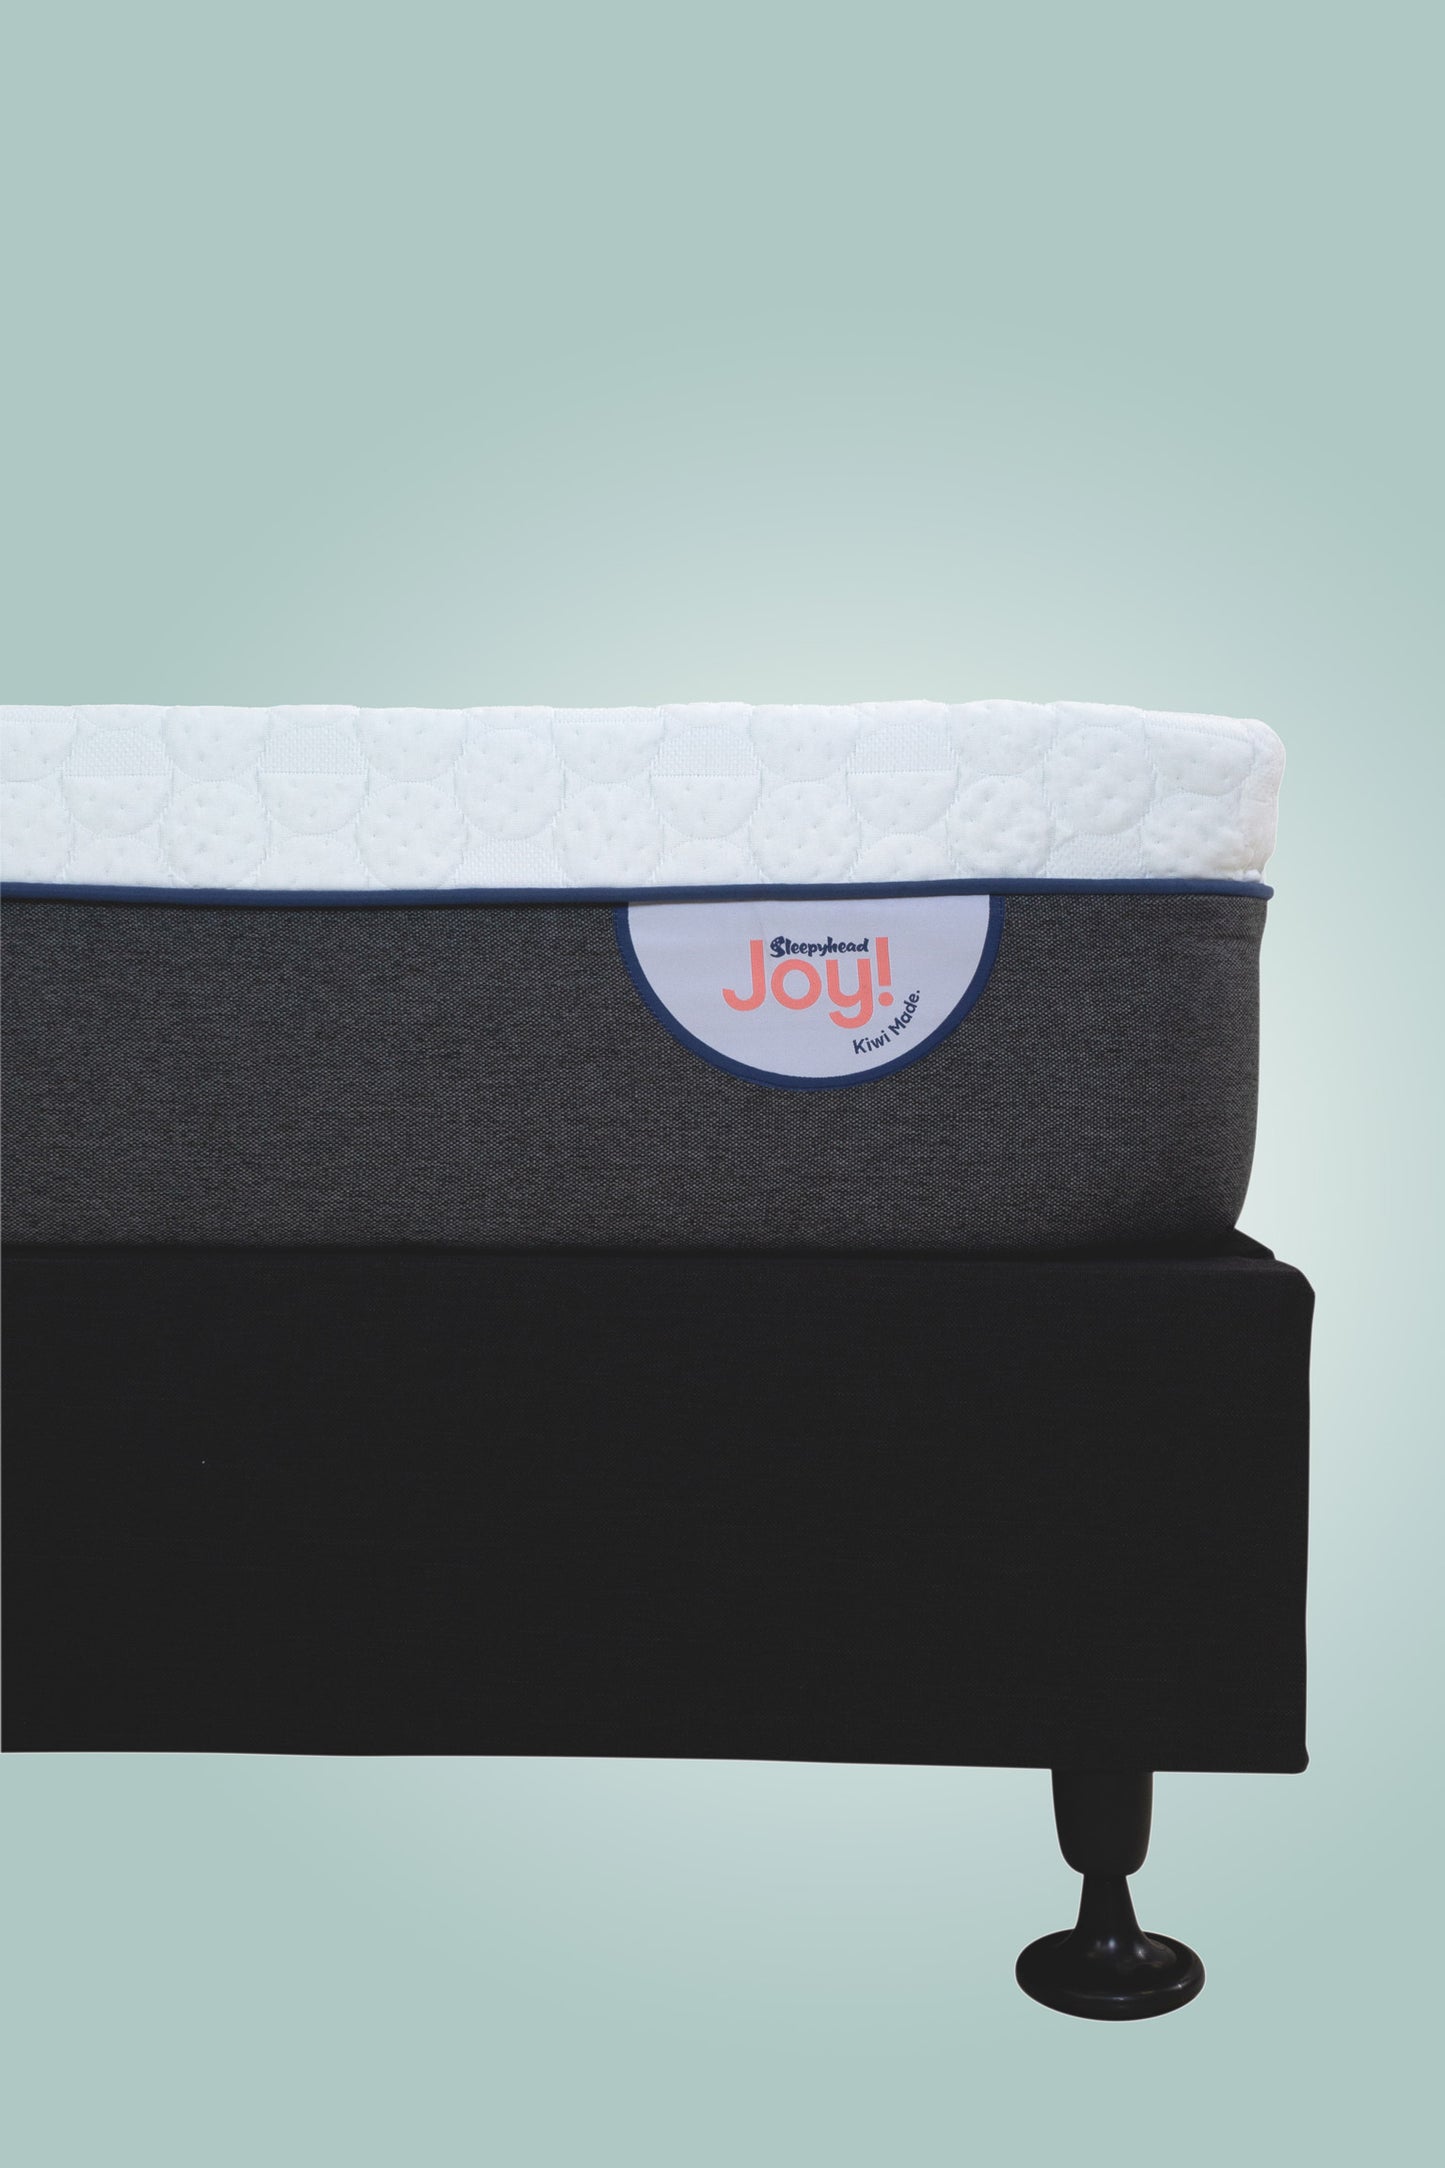 Front Corner View of Joy Kitset with the Joy Mattress - A complete package for comfort.